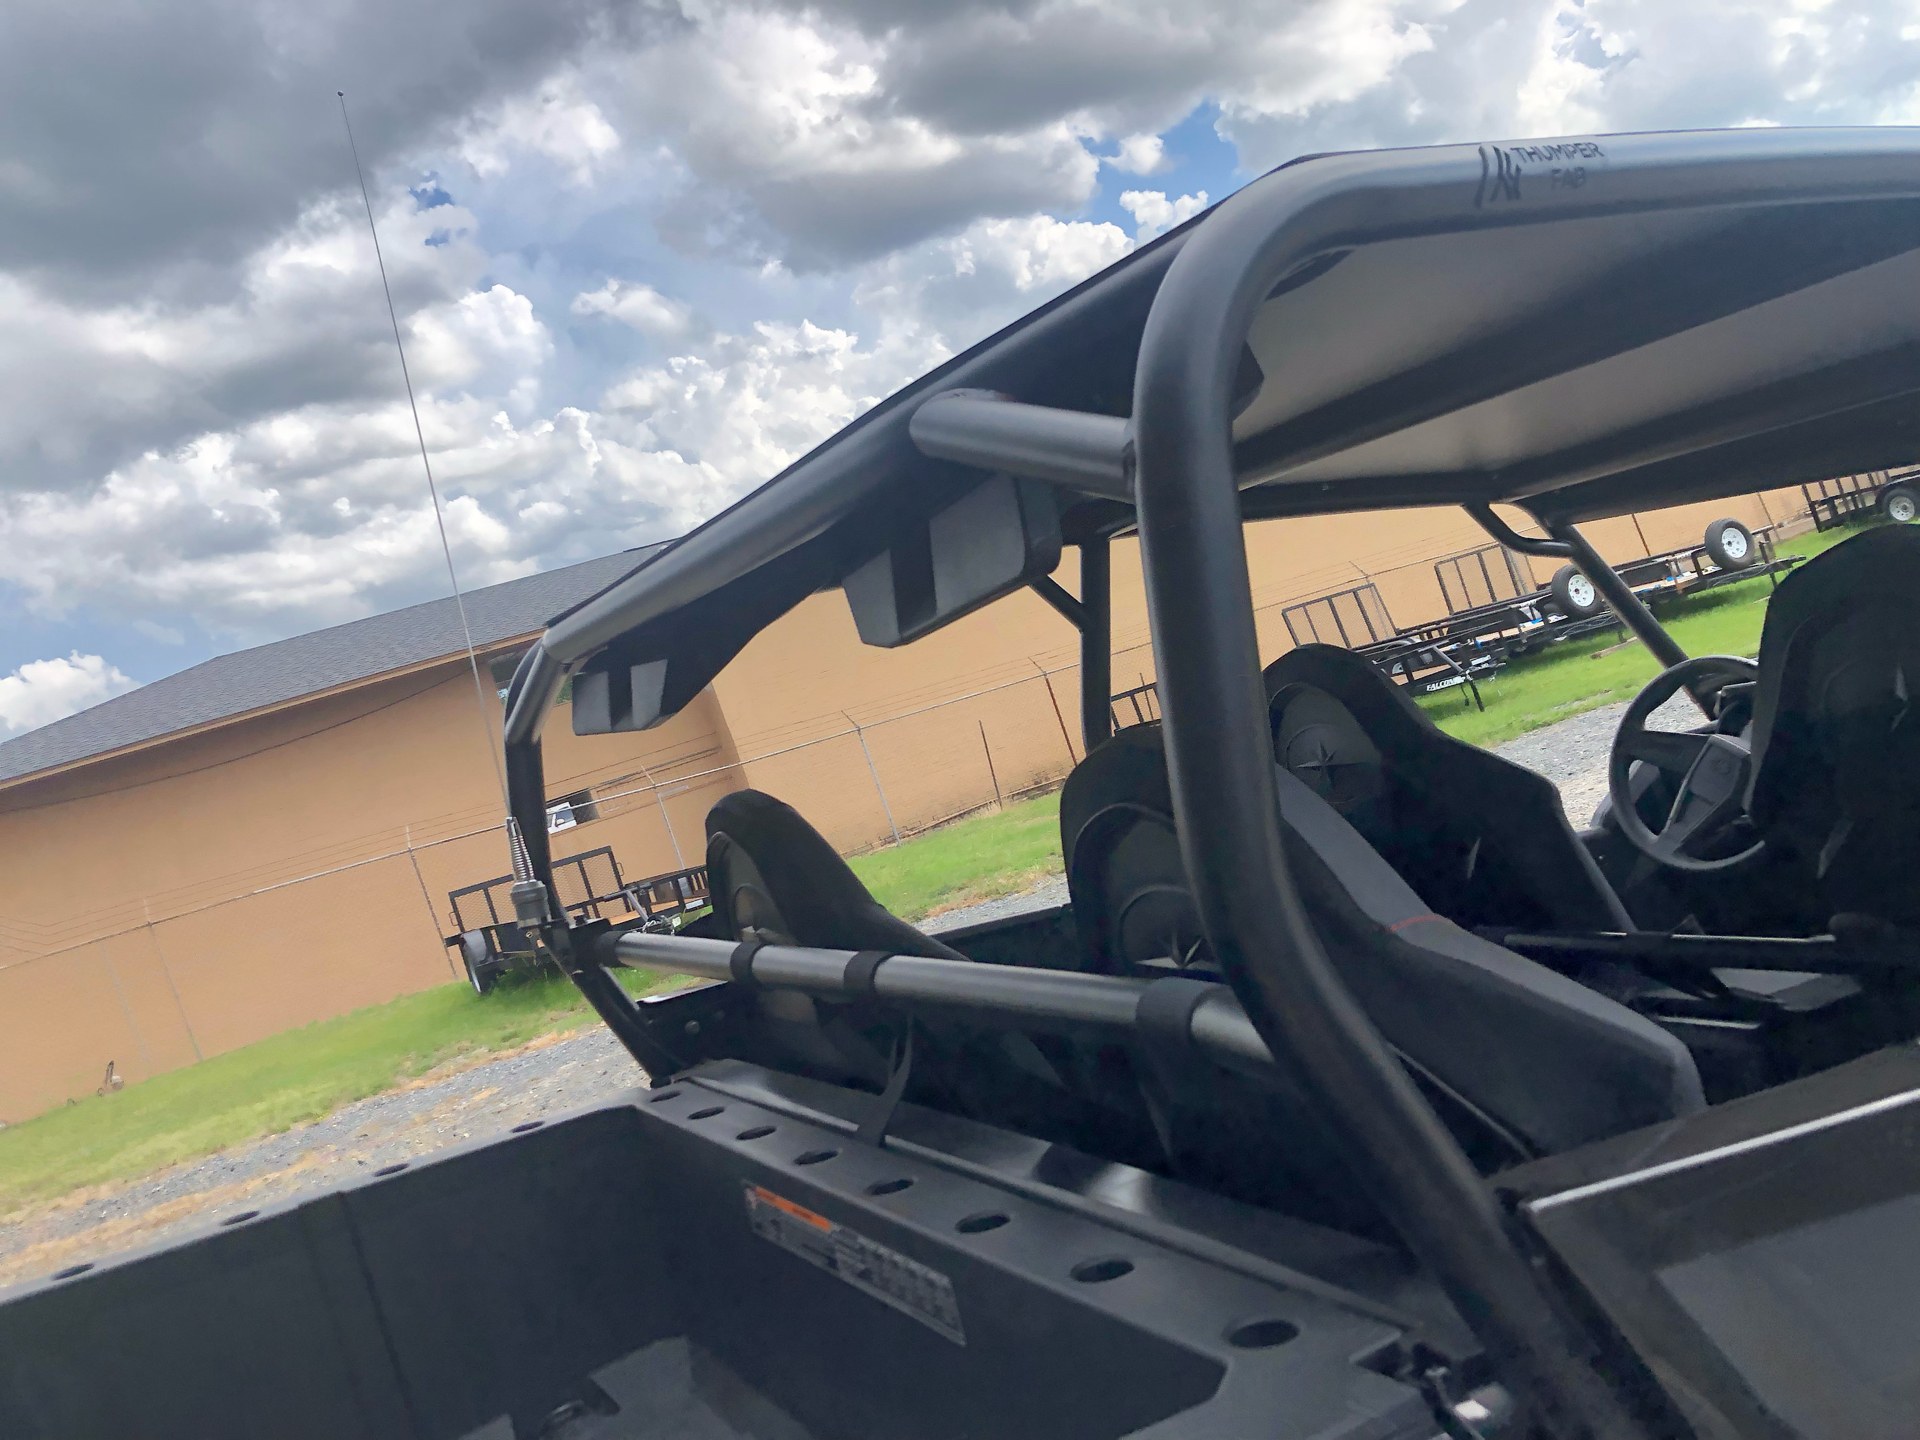 2021 Polaris General XP 4 1000 Deluxe Ride Command in Marshall, Texas - Photo 6